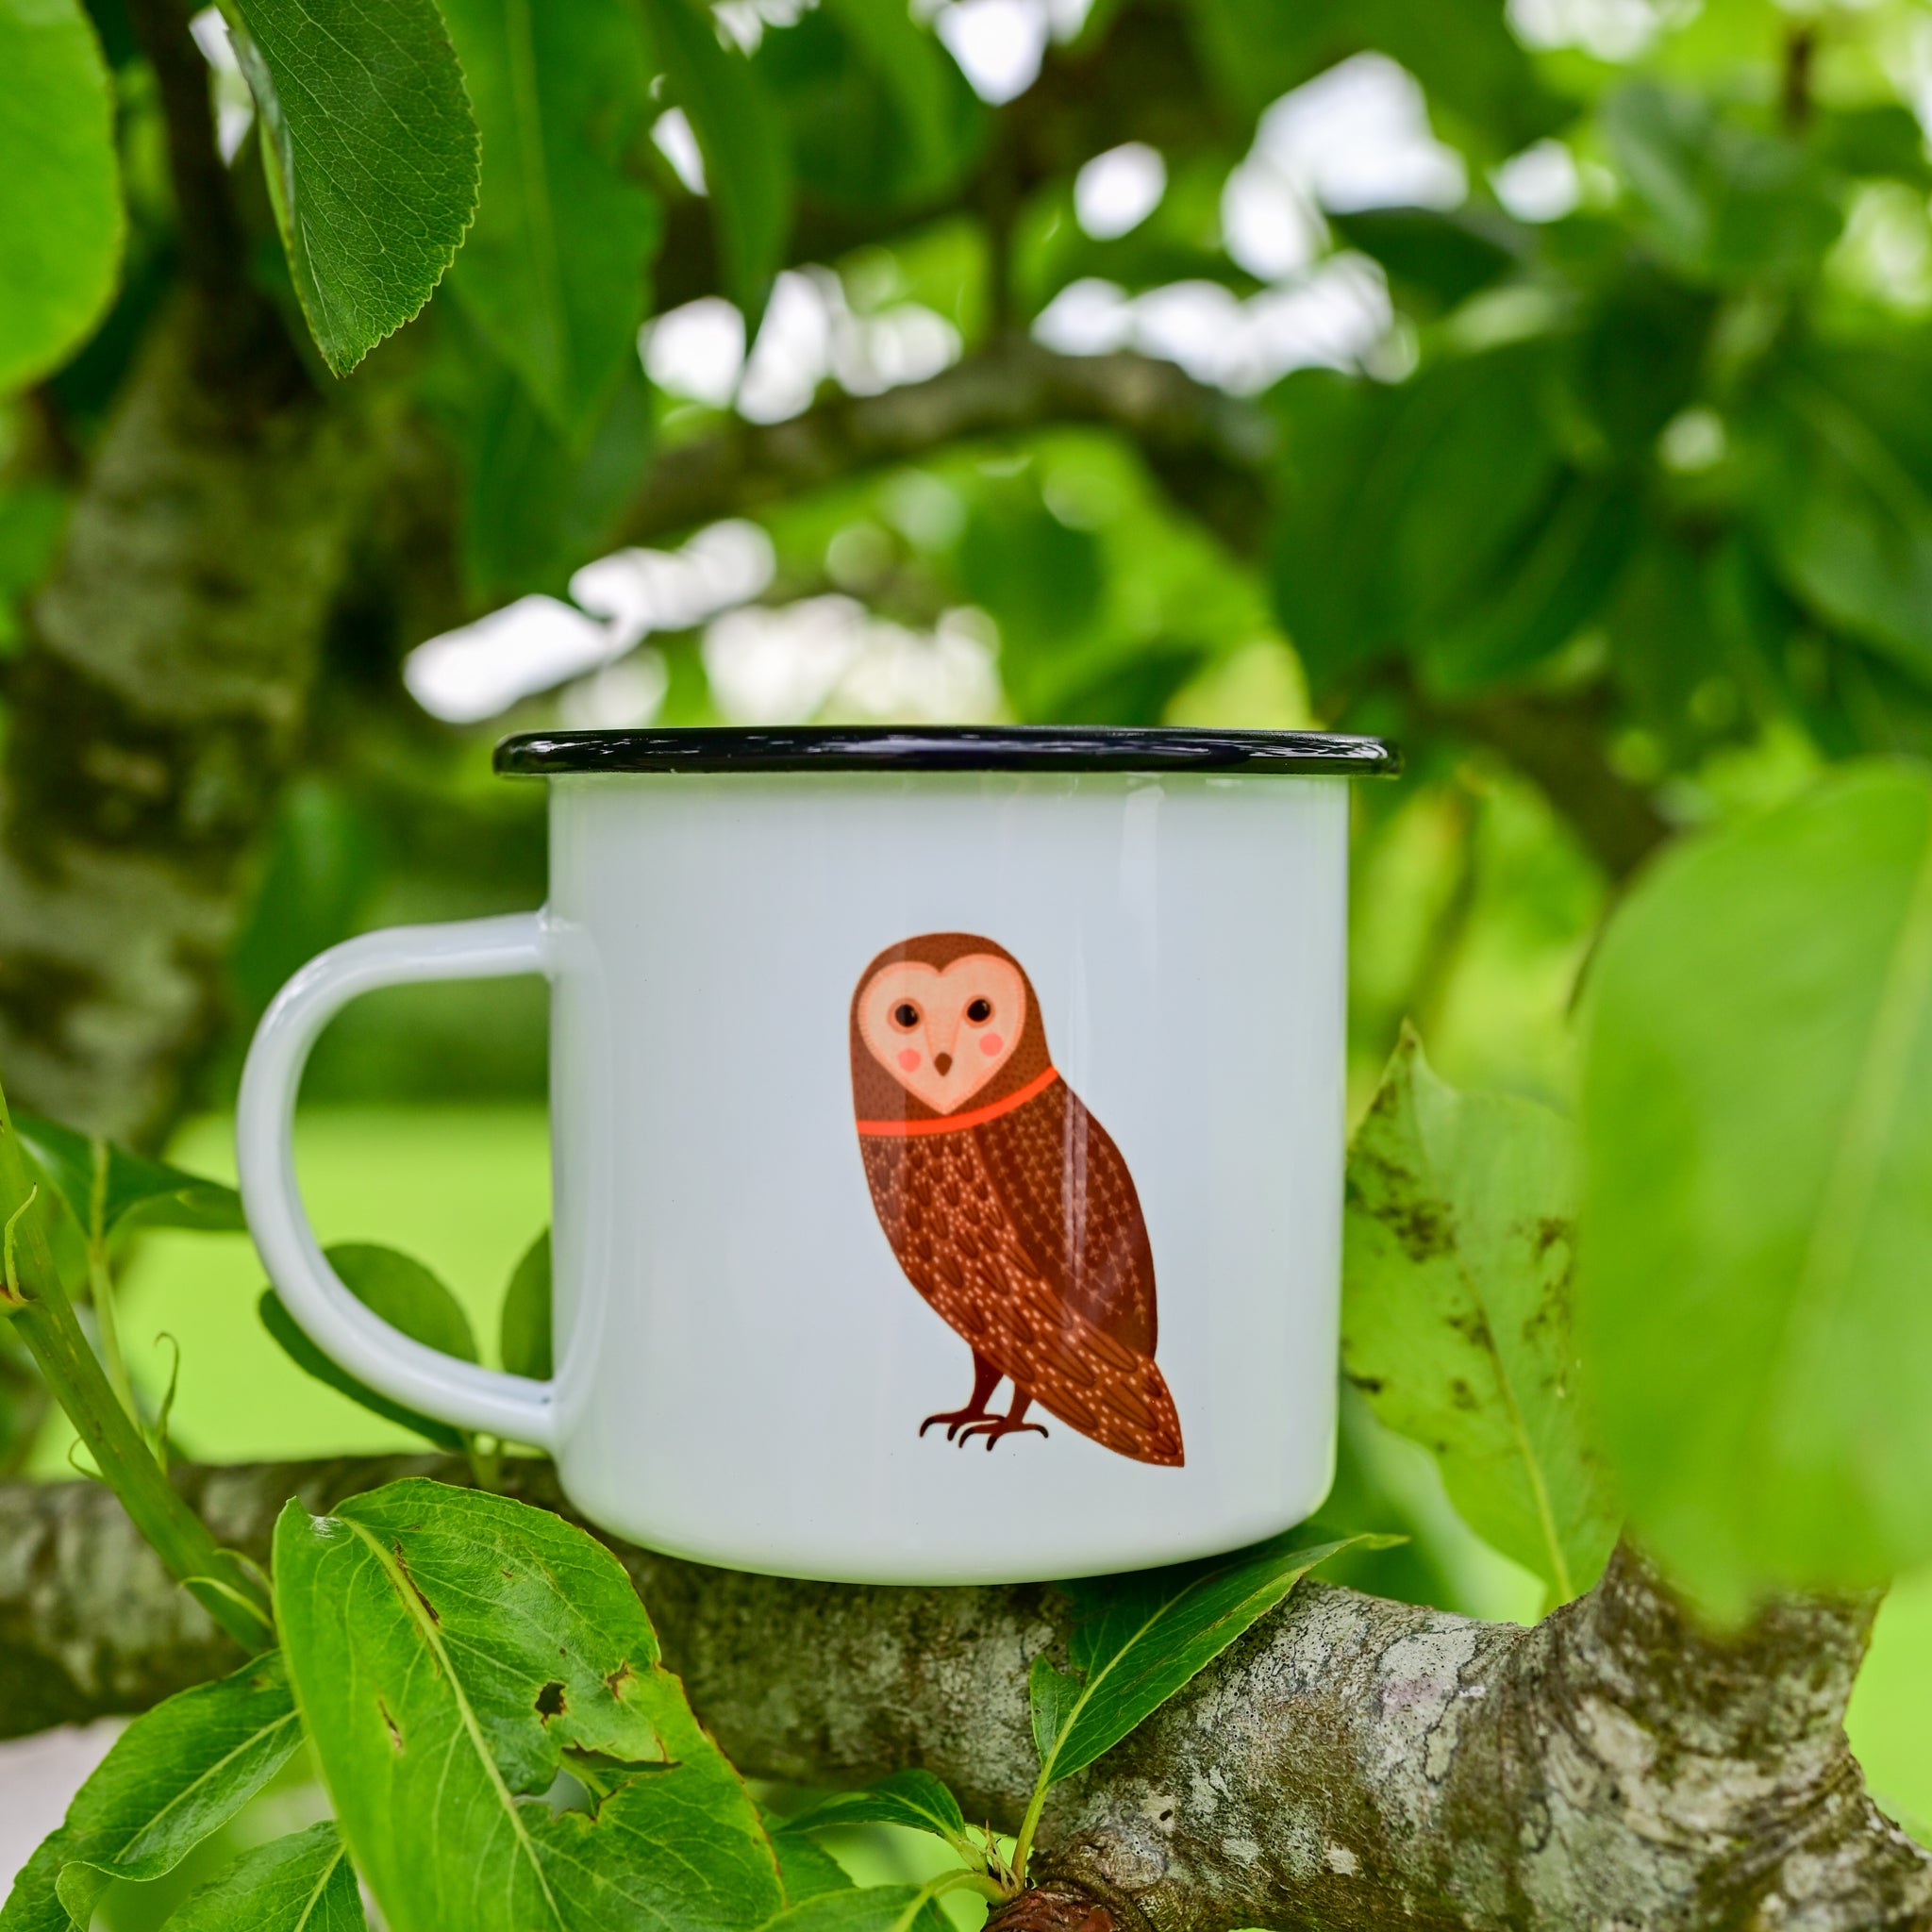 Fleur & Mimi's enamel mugs are printed with their own illustrations. This enamel mug is printed in Co. Tipperary and is a great pressie either for yourself or for a bird watching friend!